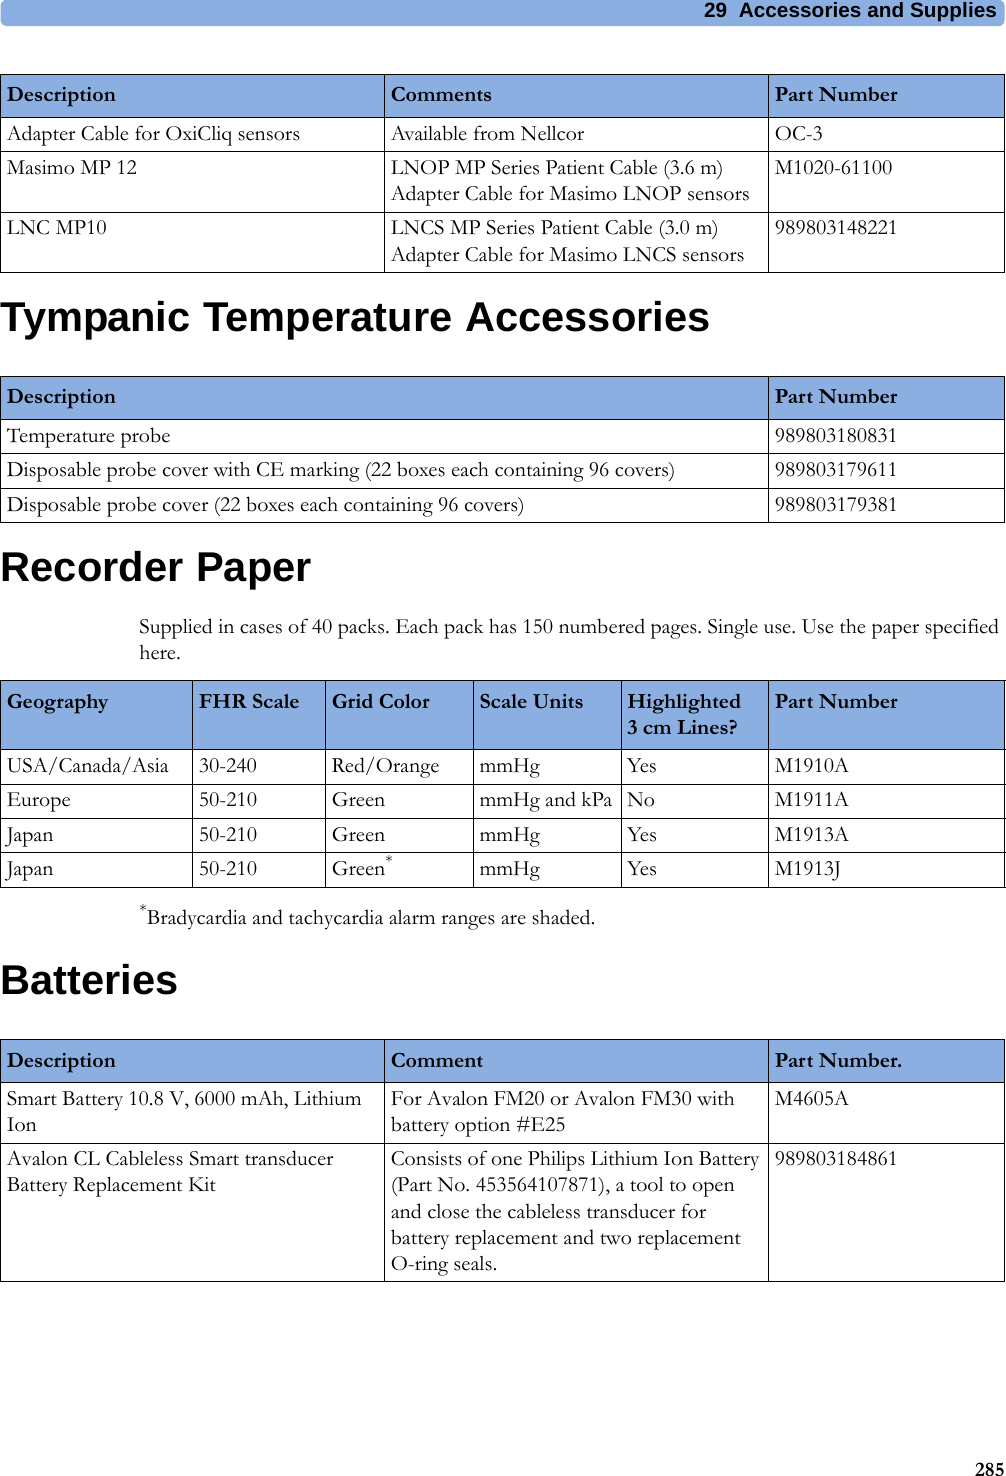 29  Accessories and Supplies285Tympanic Temperature AccessoriesRecorder PaperSupplied in cases of 40 packs. Each pack has 150 numbered pages. Single use. Use the paper specified here.*Bradycardia and tachycardia alarm ranges are shaded.BatteriesAdapter Cable for OxiCliq sensors Available from Nellcor OC-3Masimo MP 12 LNOP MP Series Patient Cable (3.6 m) Adapter Cable for Masimo LNOP sensorsM1020-61100LNC MP10 LNCS MP Series Patient Cable (3.0 m) Adapter Cable for Masimo LNCS sensors989803148221Description Comments Part NumberDescription Part NumberTemperature probe 989803180831Disposable probe cover with CE marking (22 boxes each containing 96 covers) 989803179611Disposable probe cover (22 boxes each containing 96 covers) 989803179381Geography FHR Scale Grid Color Scale Units Highlighted 3 cm Lines?Part NumberUSA/Canada/Asia 30-240 Red/Orange mmHg Yes M1910AEurope 50-210 Green mmHg and kPa No M1911AJapan 50-210 Green mmHg Yes M1913AJapan 50-210 Green*mmHg Yes M1913JDescription Comment Part Number.Smart Battery 10.8 V, 6000 mAh, Lithium IonFor Avalon FM20 or Avalon FM30 with battery option #E25M4605AAvalon CL Cableless Smart transducer Battery Replacement KitConsists of one Philips Lithium Ion Battery (Part No. 453564107871), a tool to open and close the cableless transducer for battery replacement and two replacement O-ring seals.989803184861